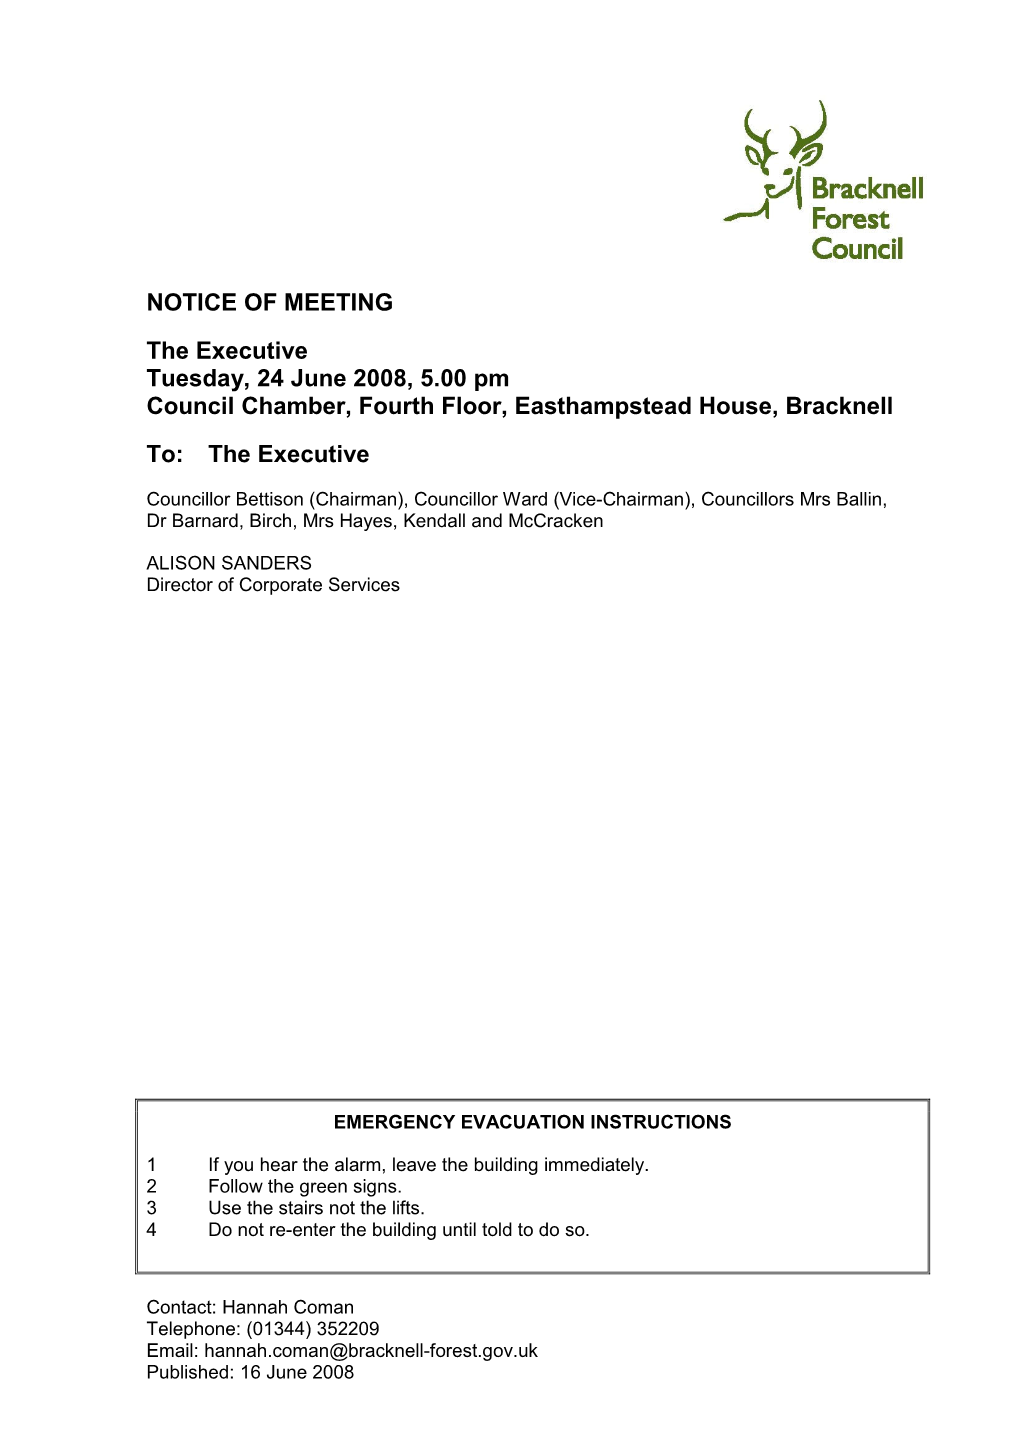 NOTICE of MEETING the Executive Tuesday, 24 June 2008, 5.00 Pm Council Chamber, Fourth Floor, Easthampstead House, Bracknell